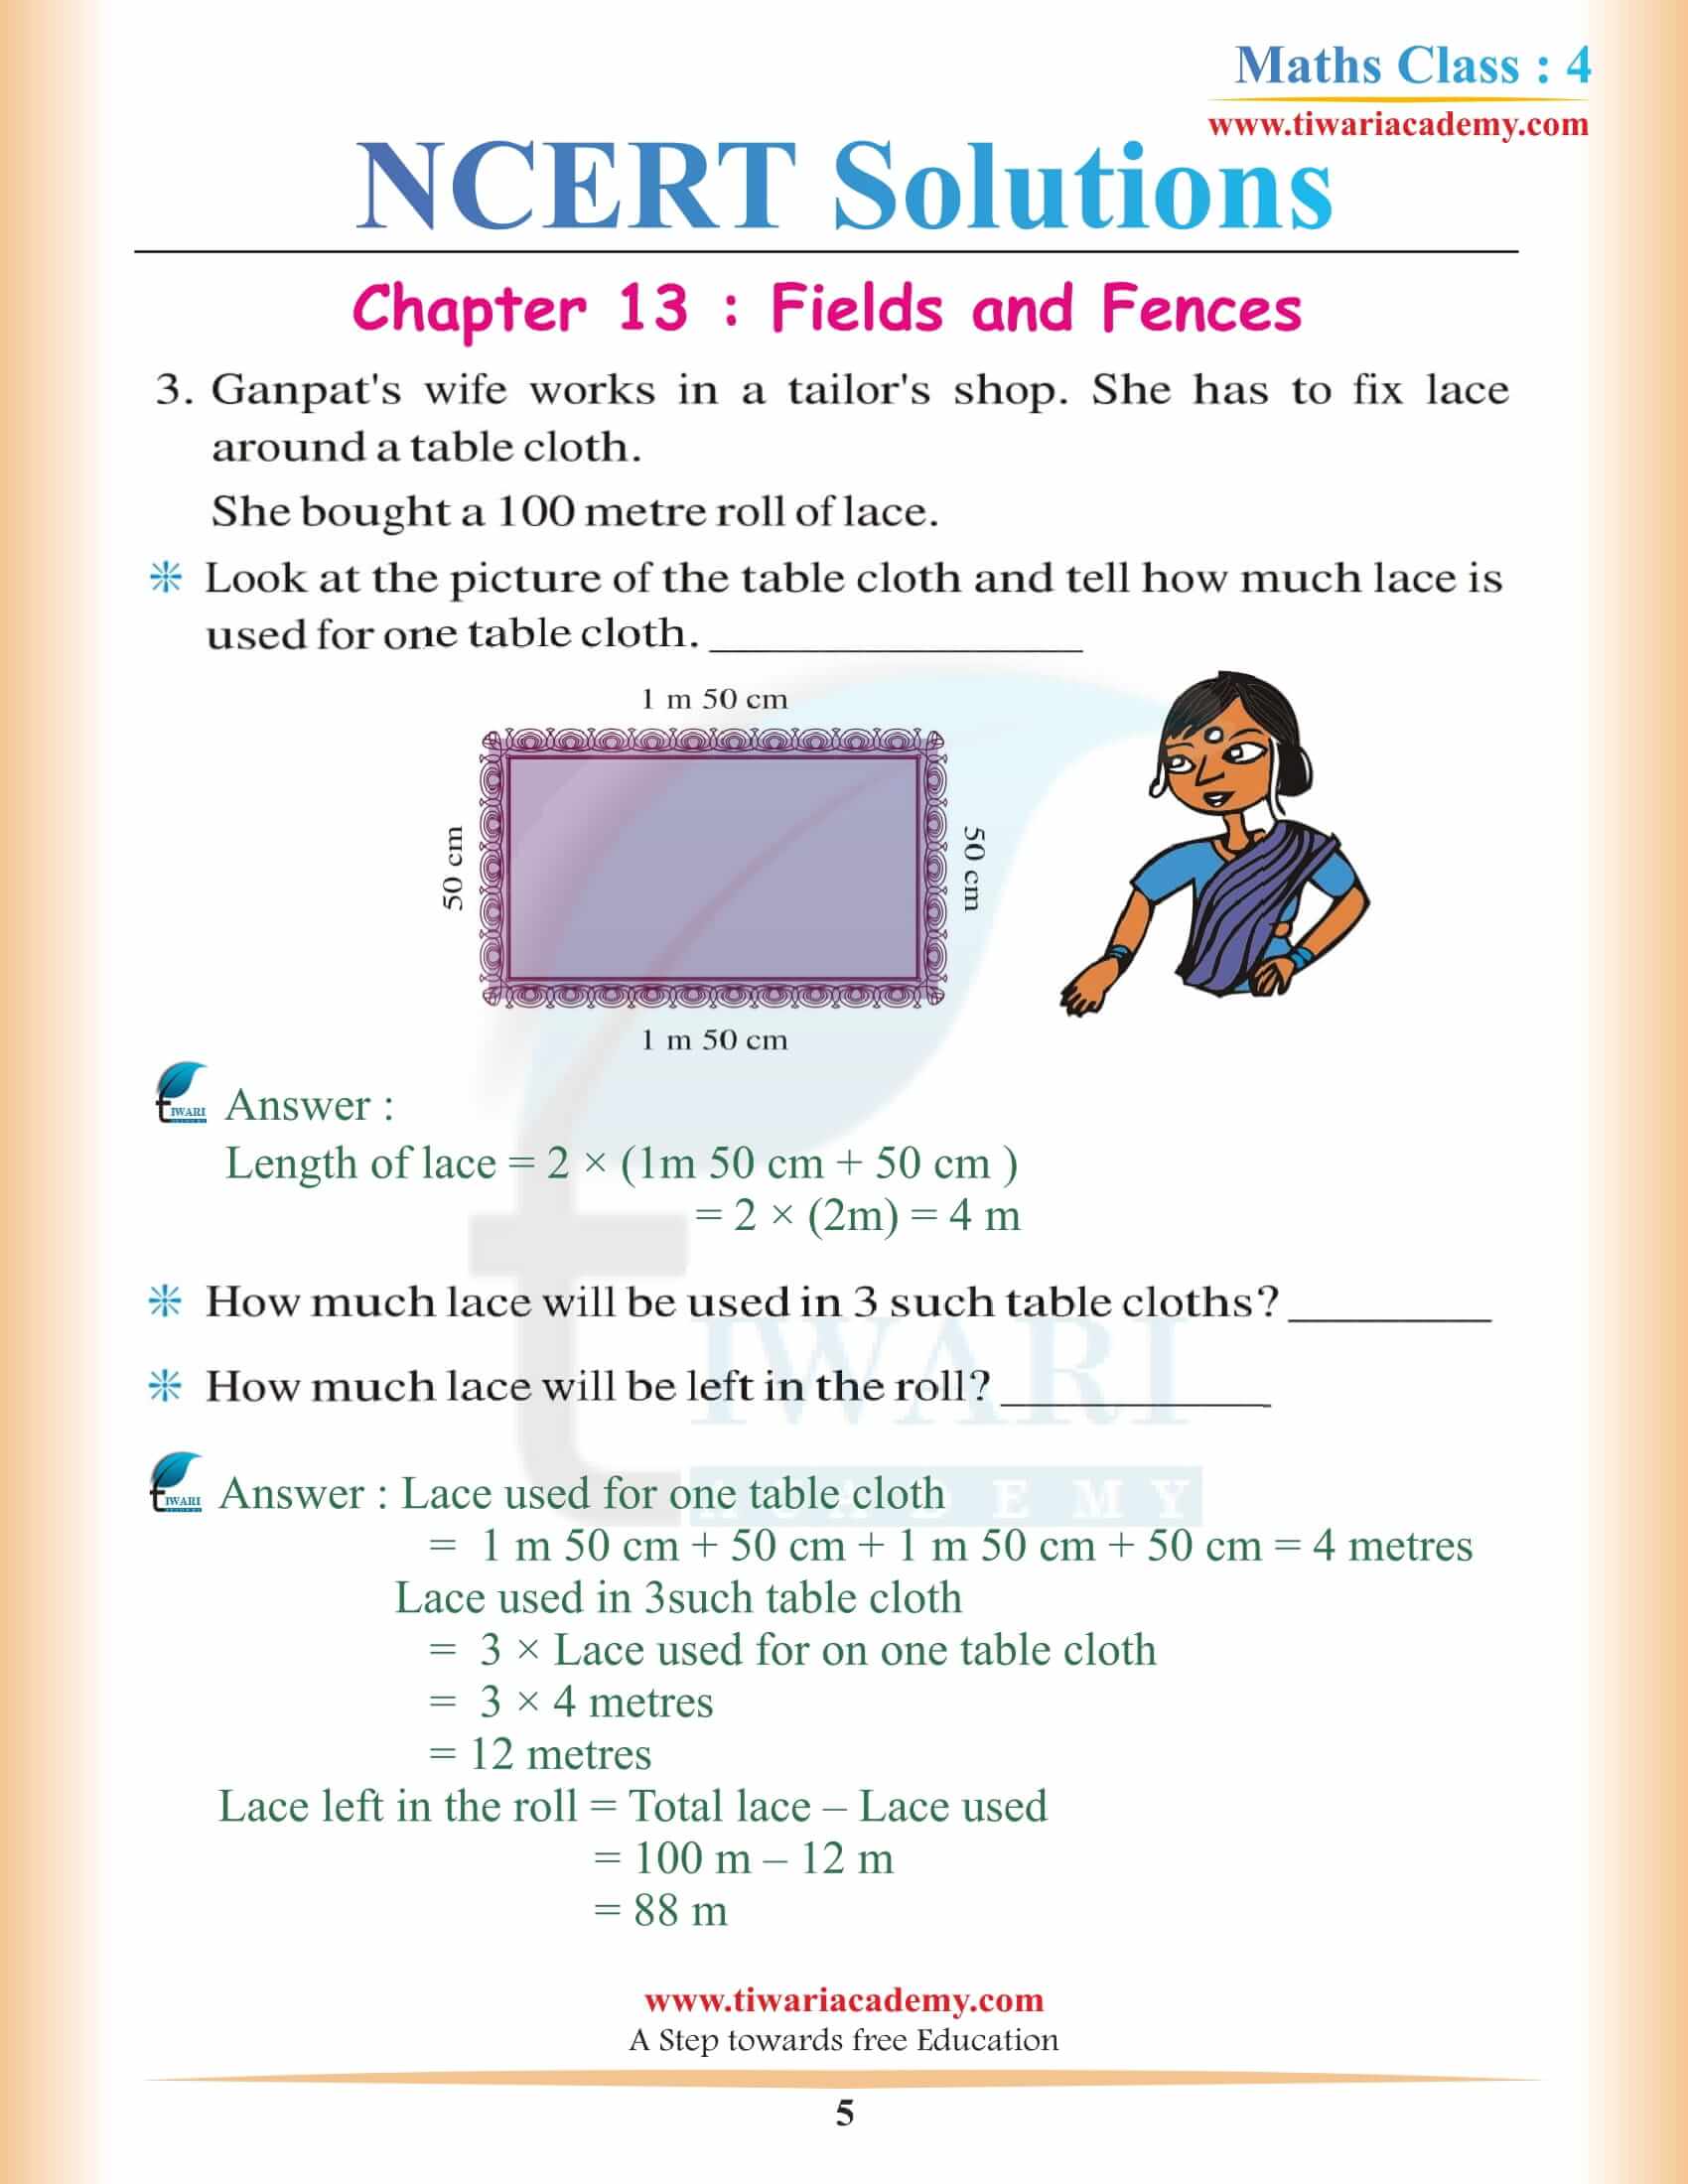 NCERT Solutions for Class 4 Maths Chapter 13 free download